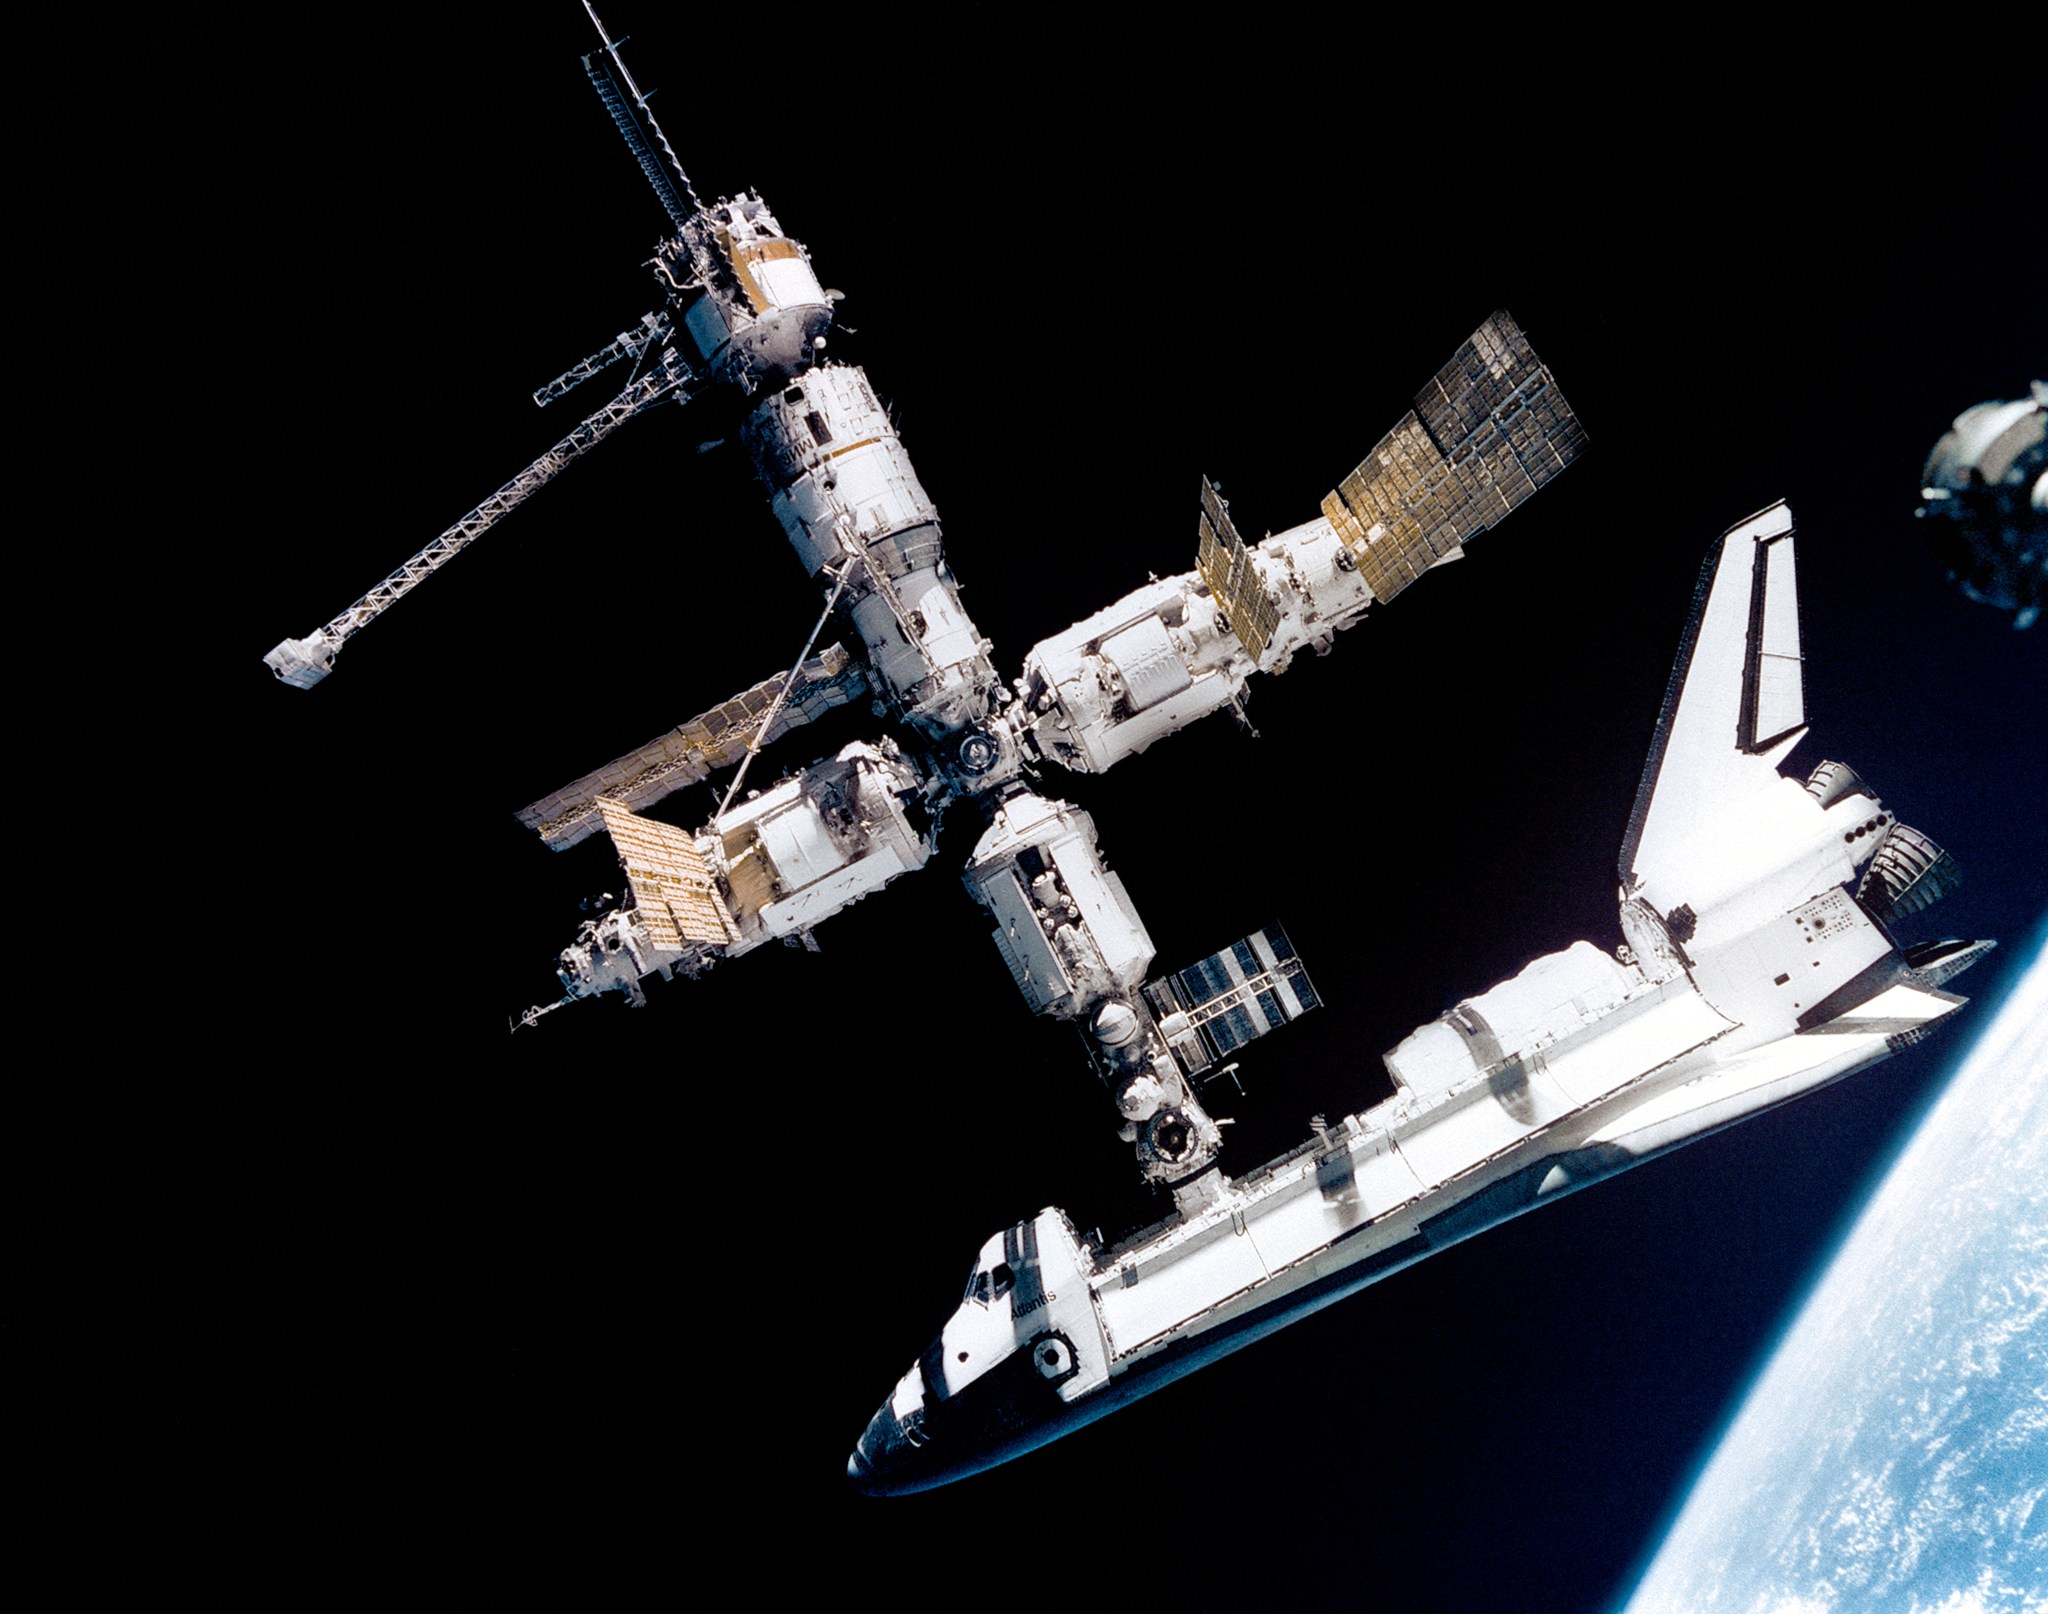 View of the space shuttle Atlantis still connected to Russia's Mir Space Station on July 4, 1995.